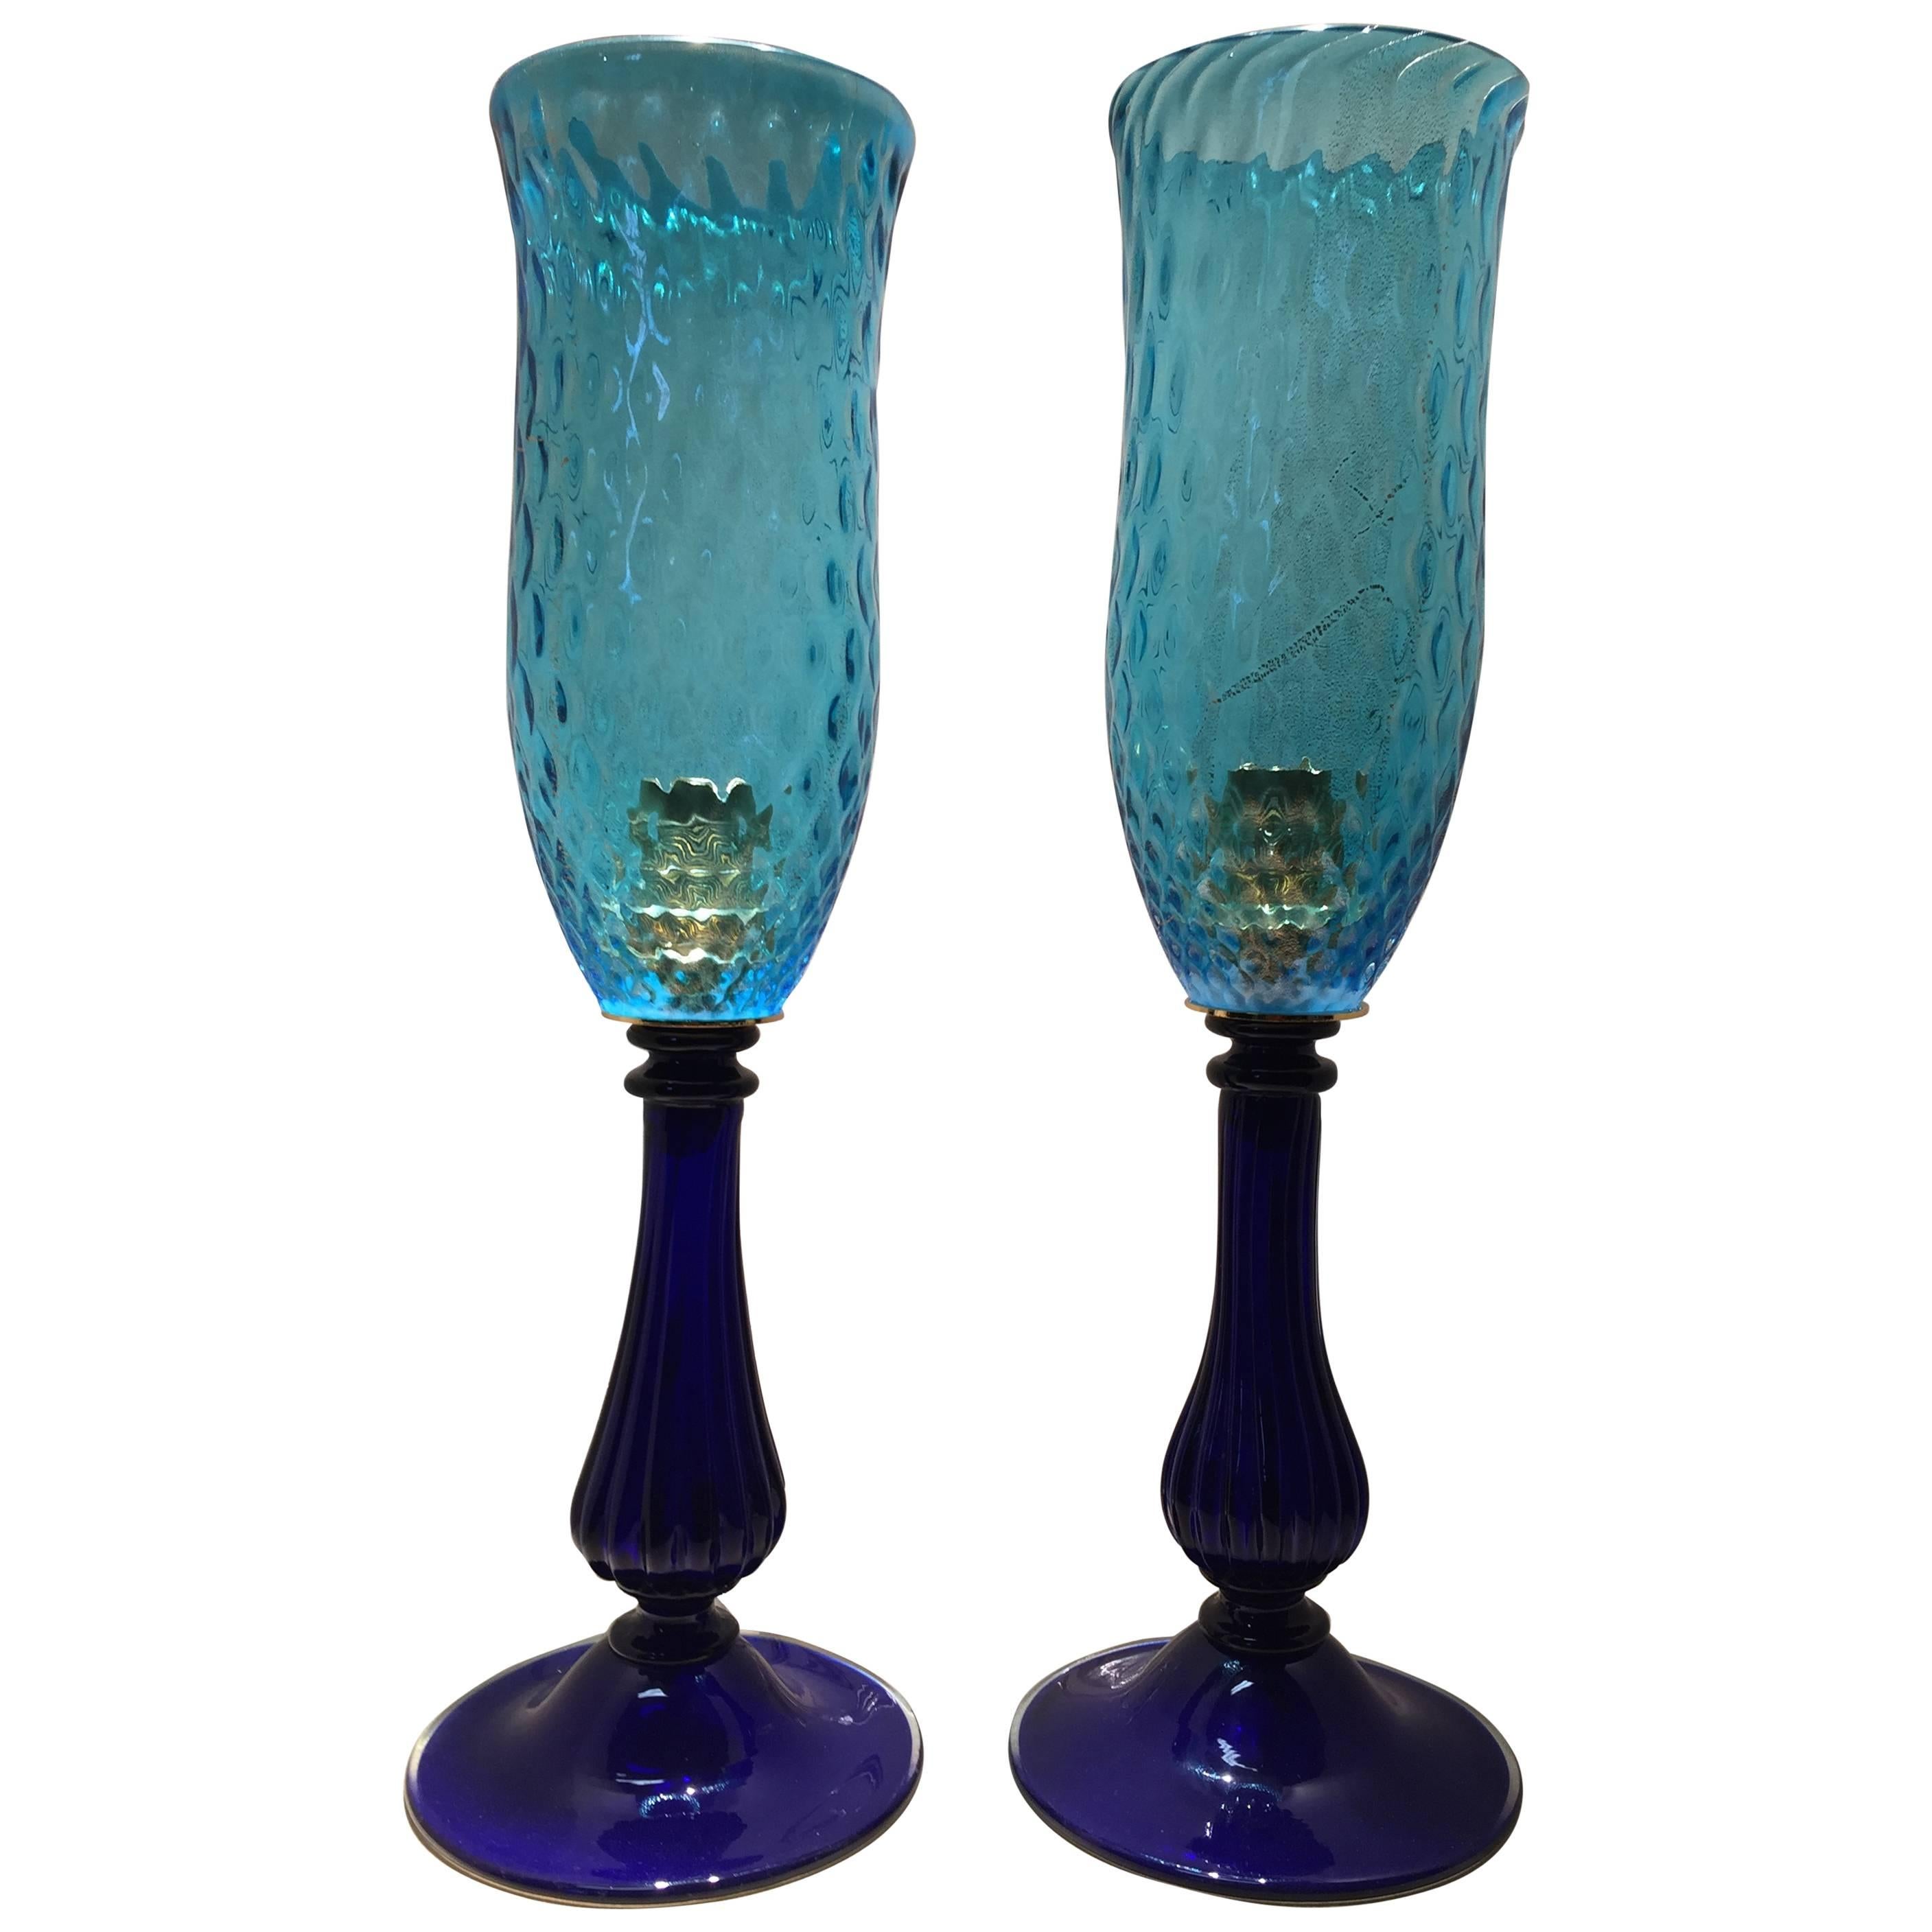 Beautiful Couple of Table Lamps Made by Stefano Toso Glass Factory For Sale